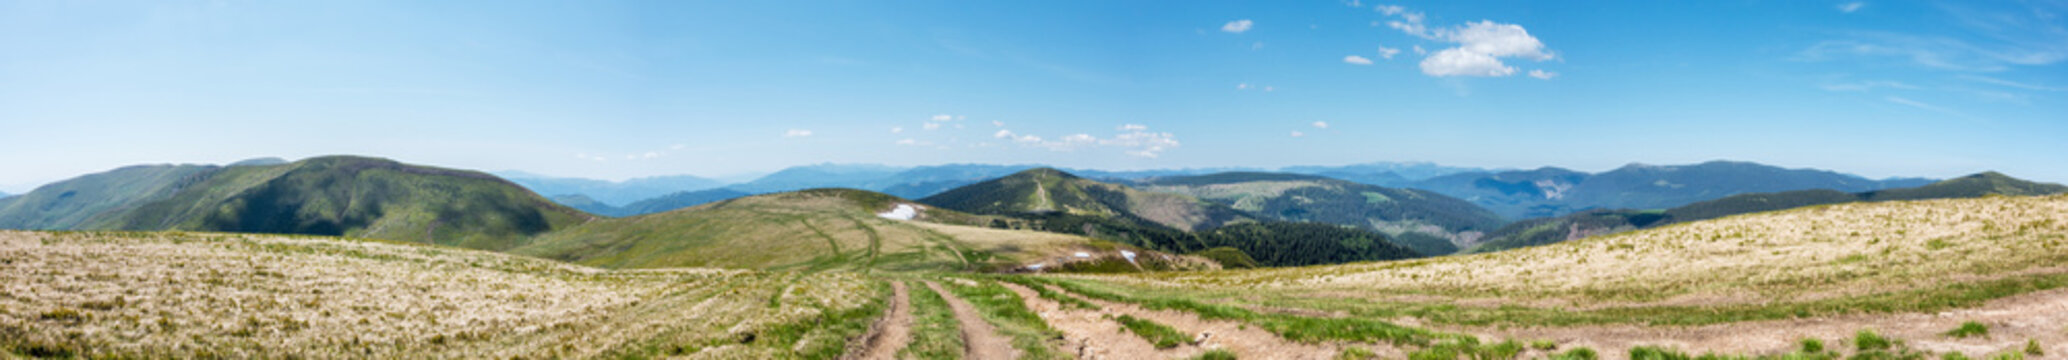 Panoramic view of amazing spring mountains with roads